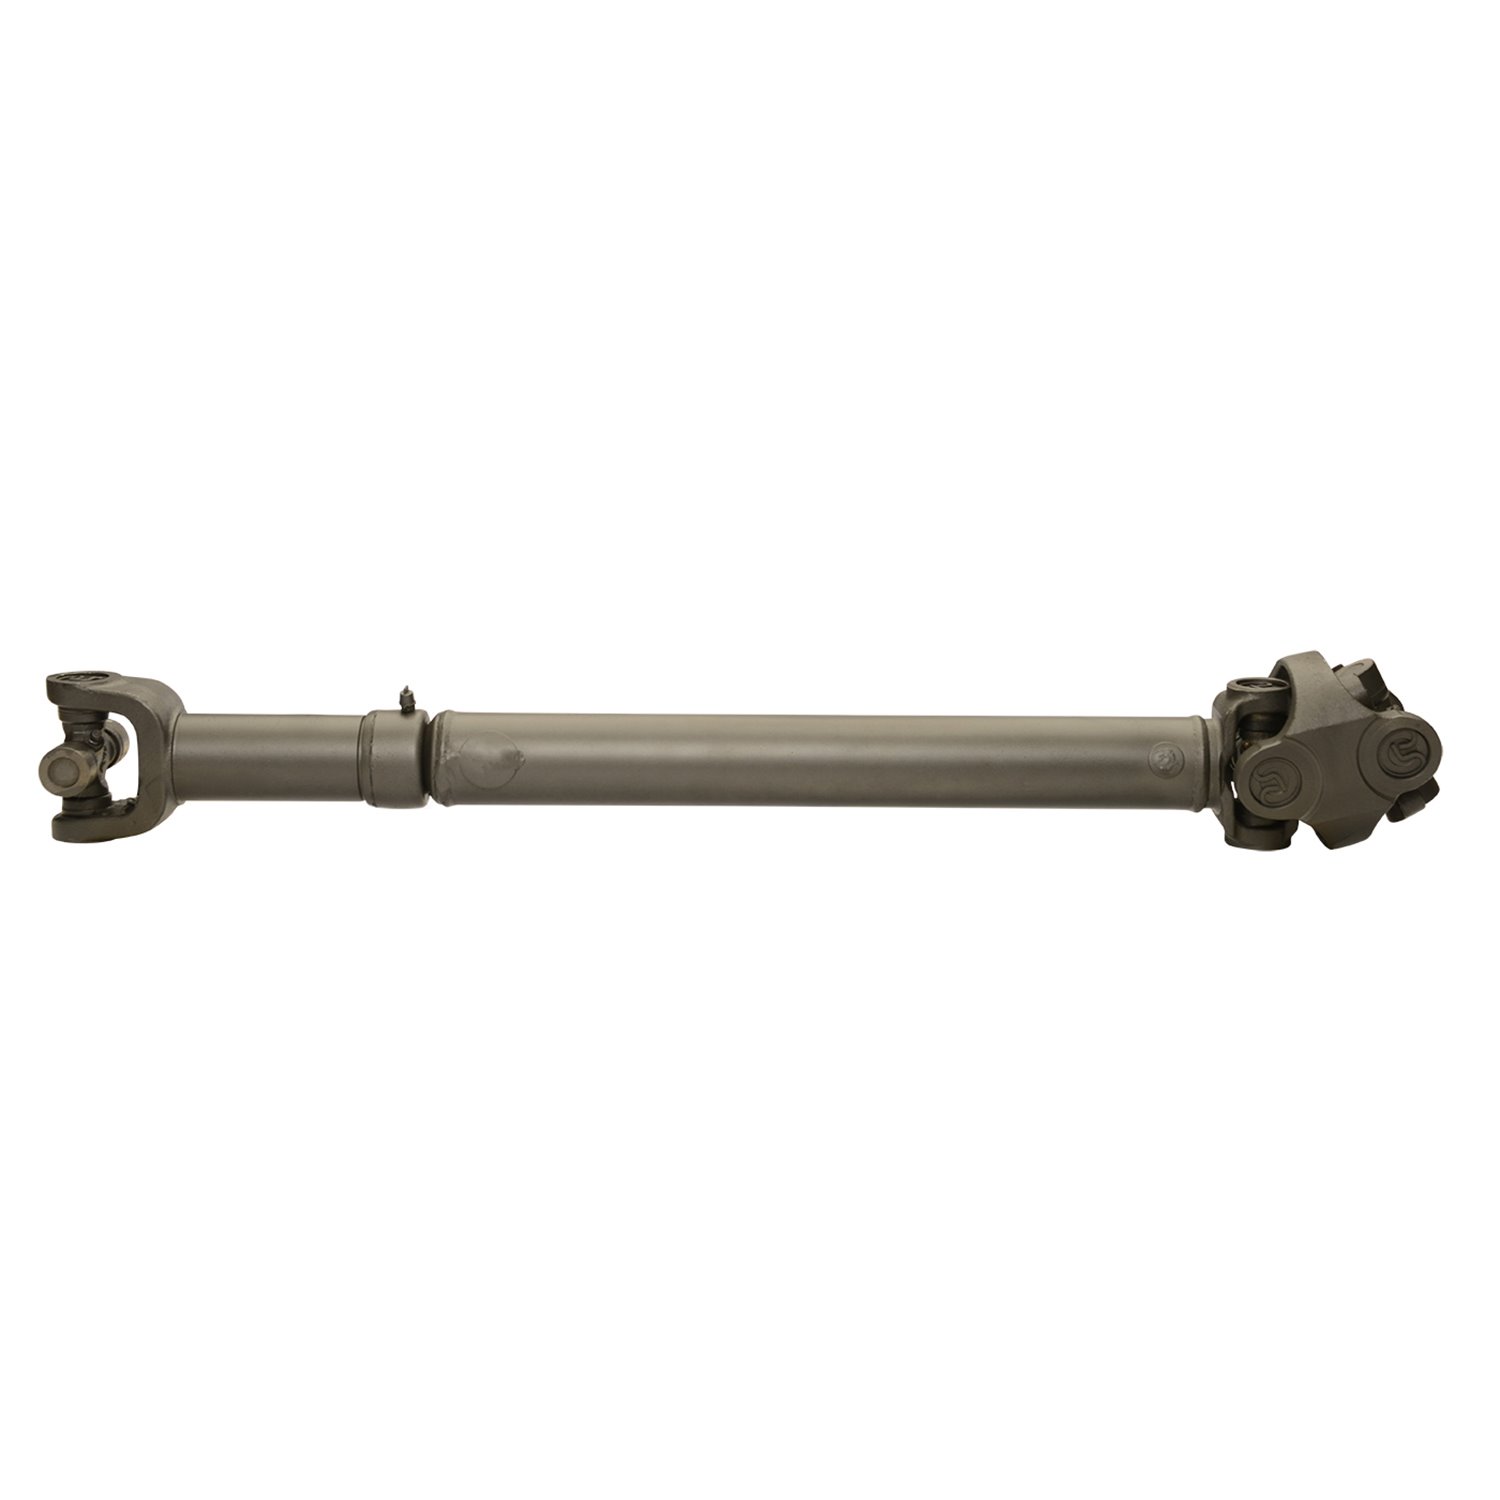 USA Standard ZDS9320 Front Driveshaft GM K10 Series Truck/Suv, 23.25 in. Center-To-Center